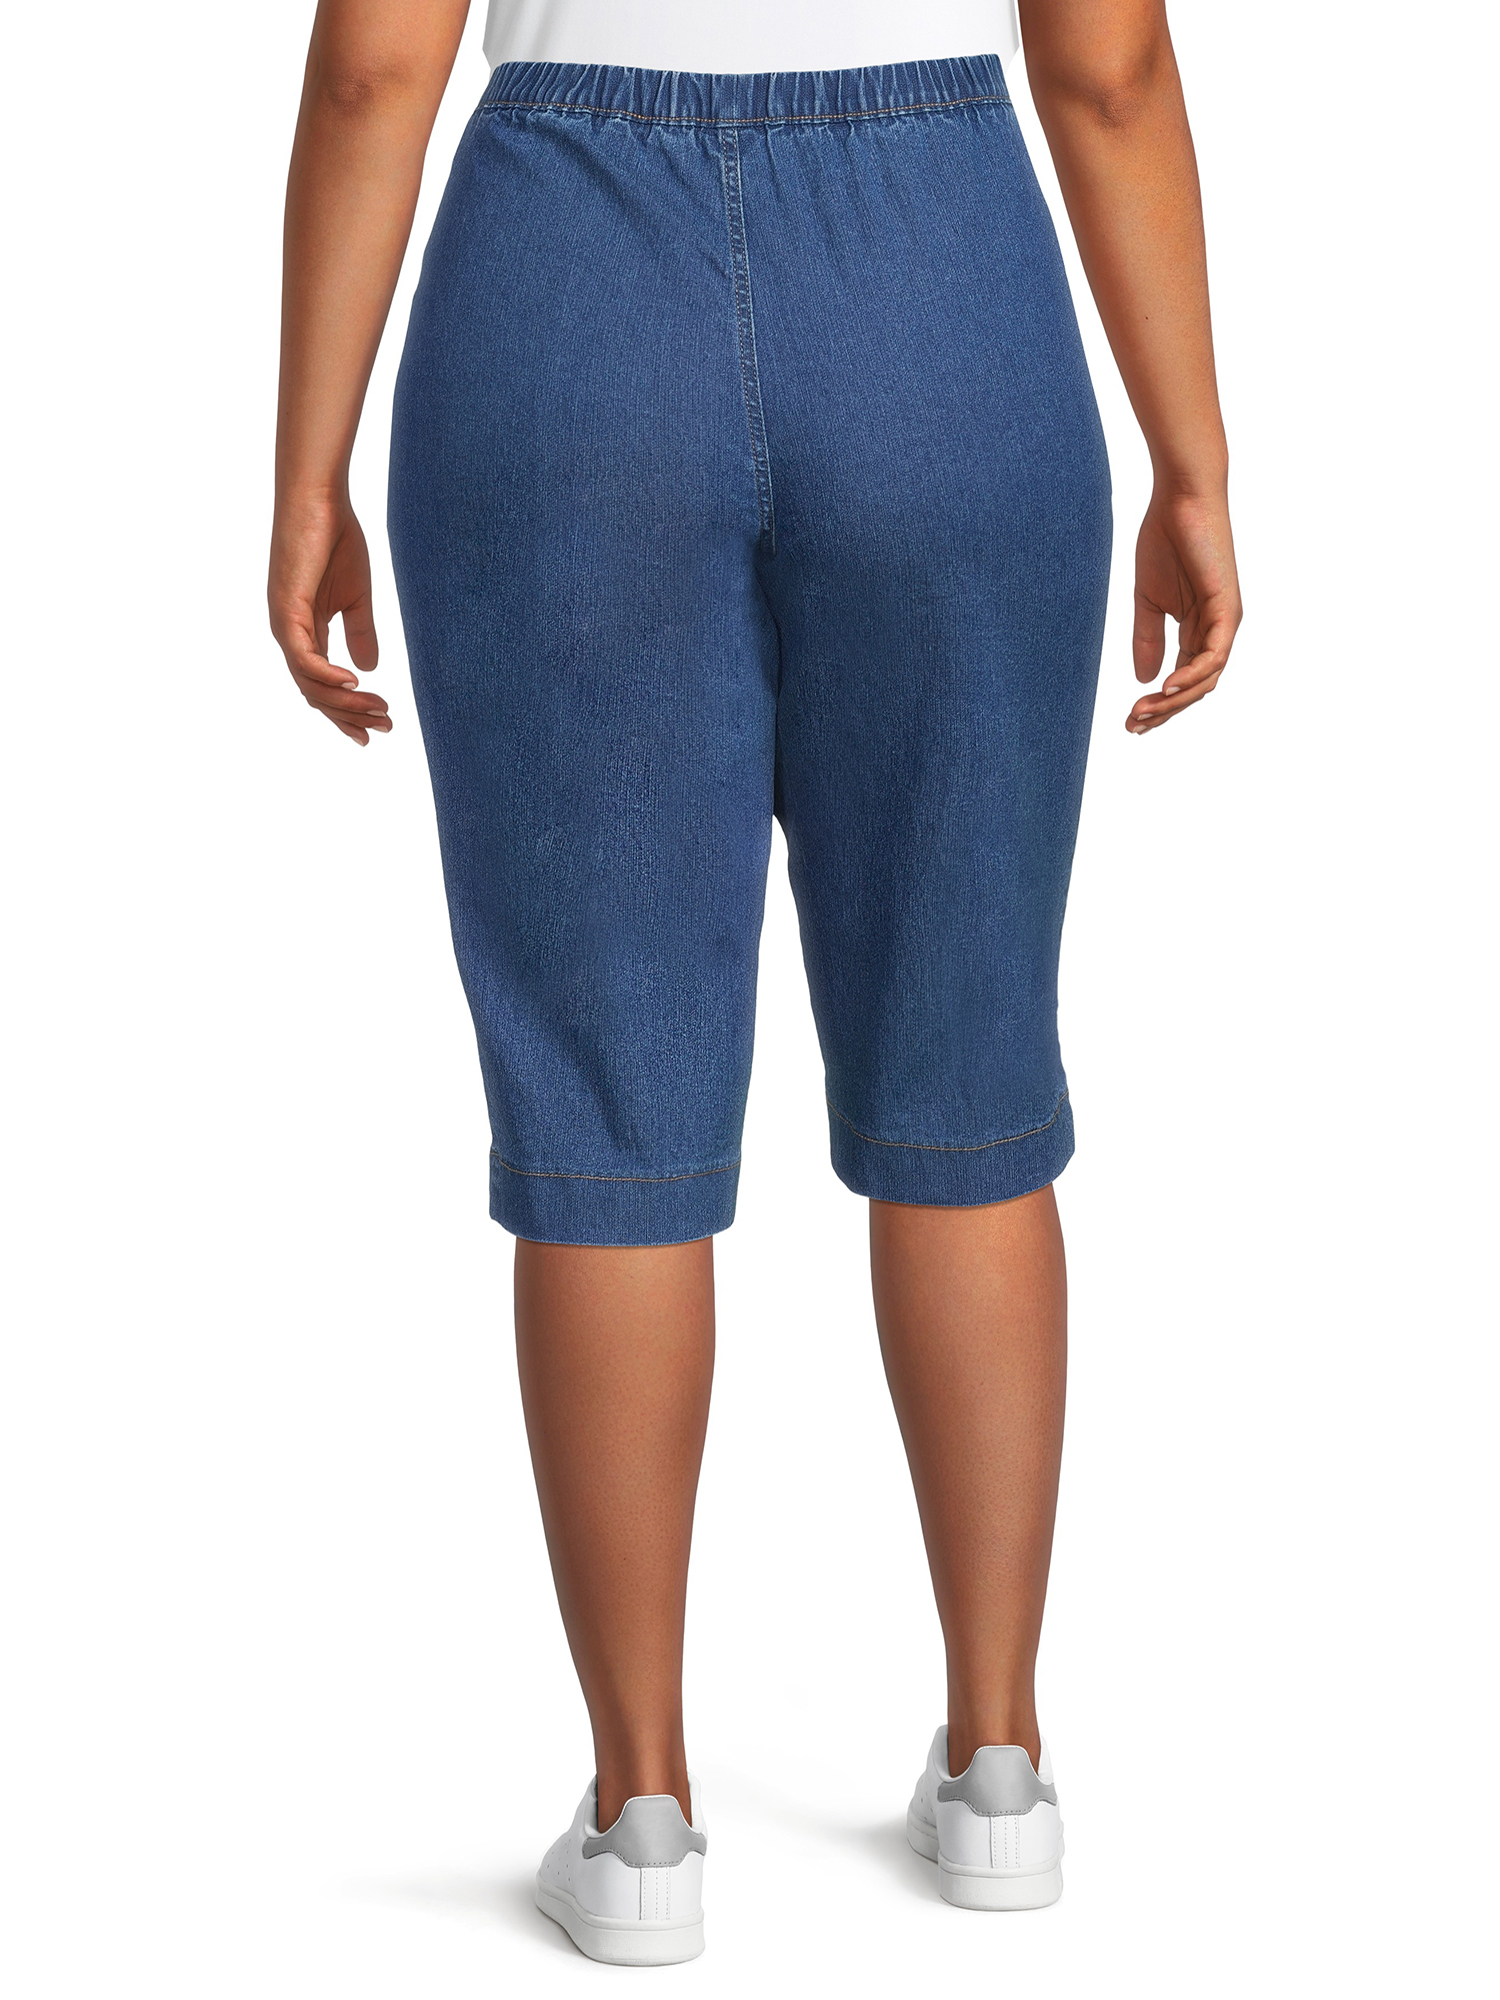 Just My Size Women's Plus Size Pull On 2 Pocket Stretch Capri - image 2 of 6